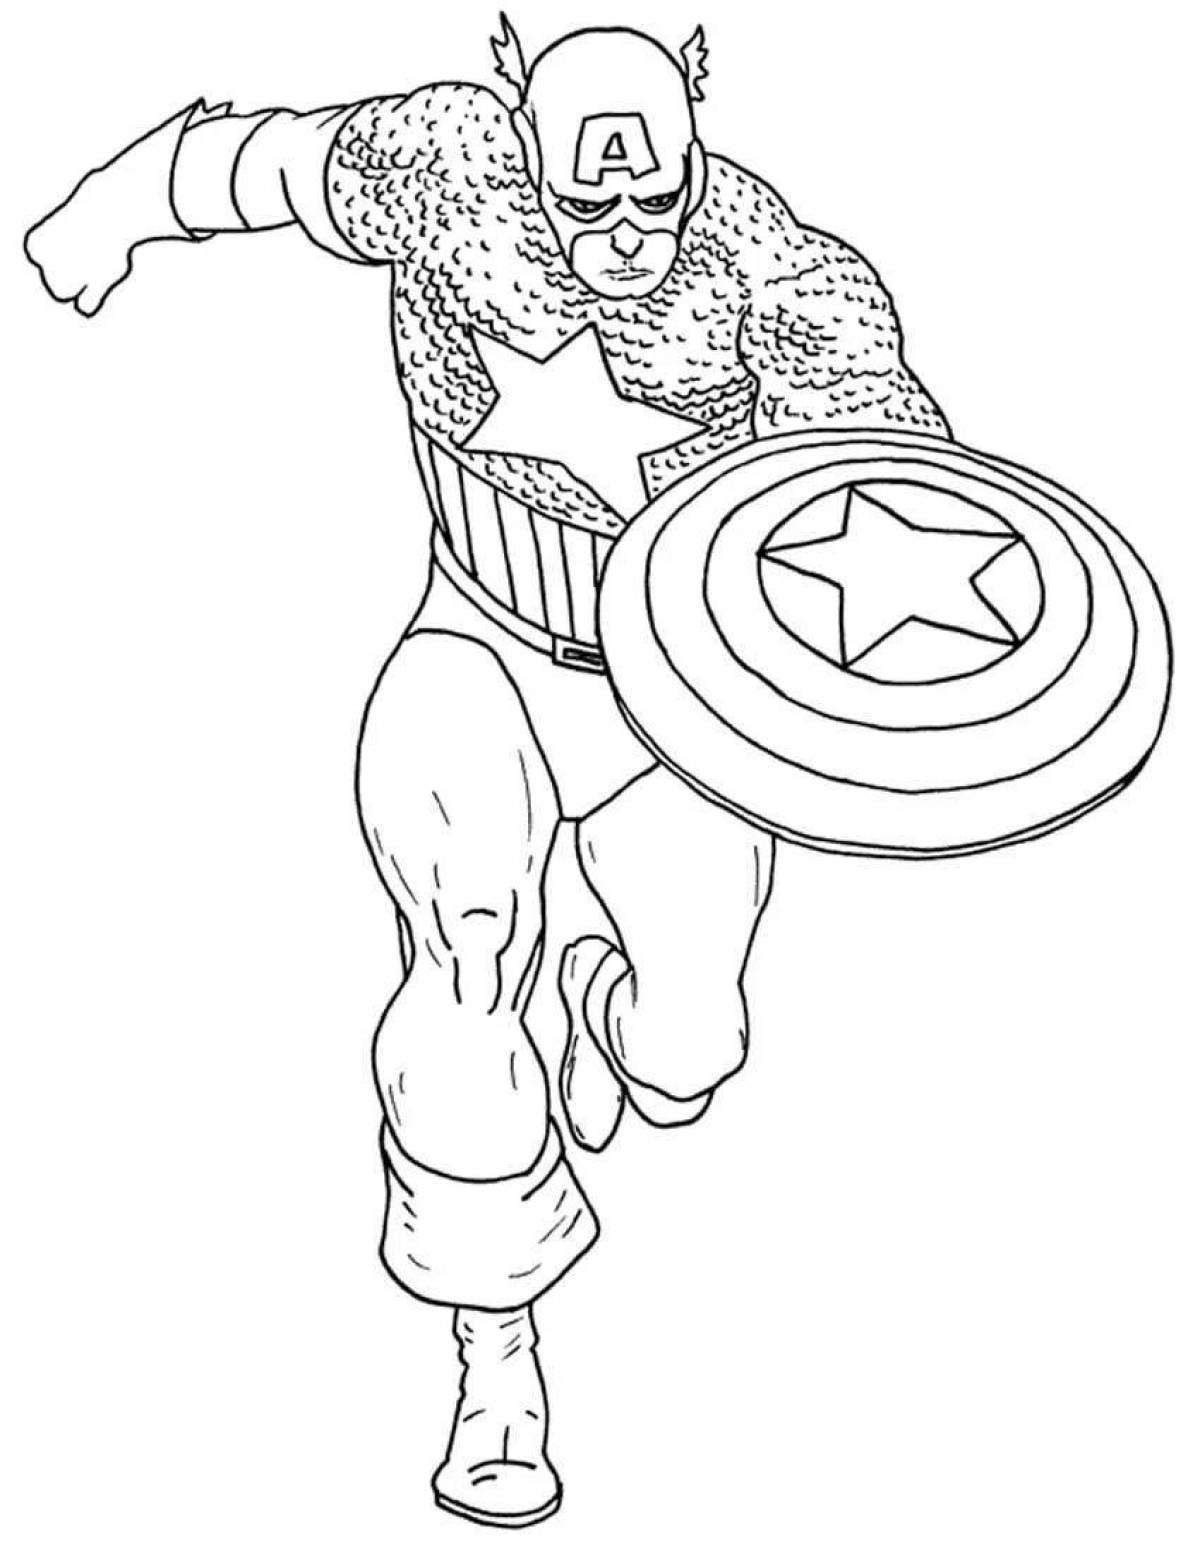 Marvel heroes incredible coloring book for kids